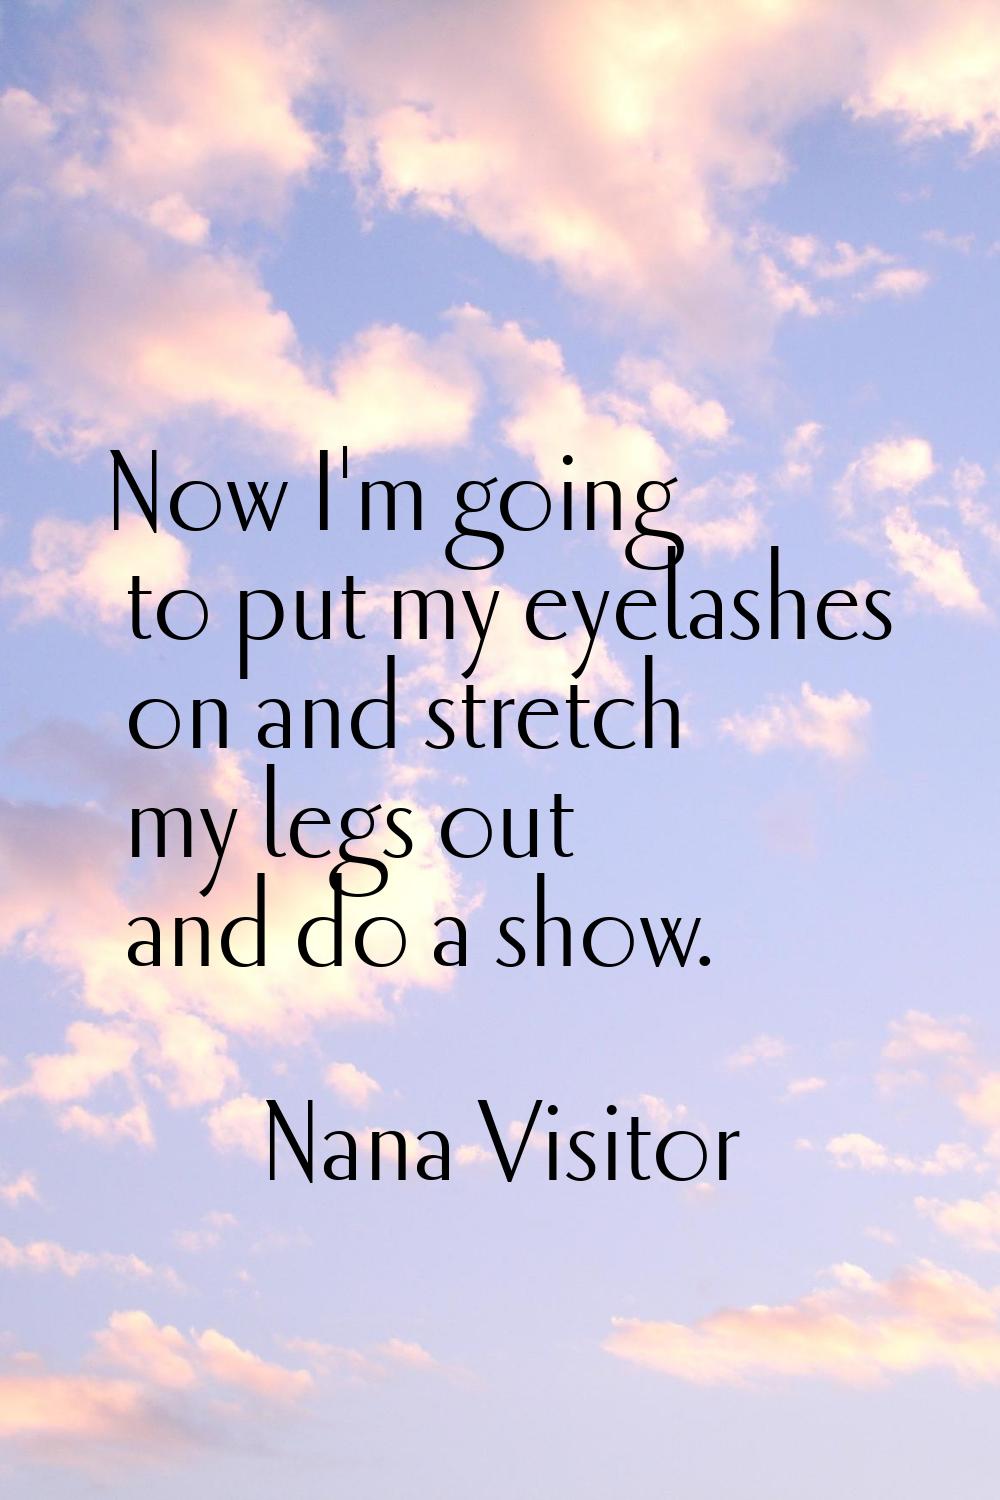 Now I'm going to put my eyelashes on and stretch my legs out and do a show.